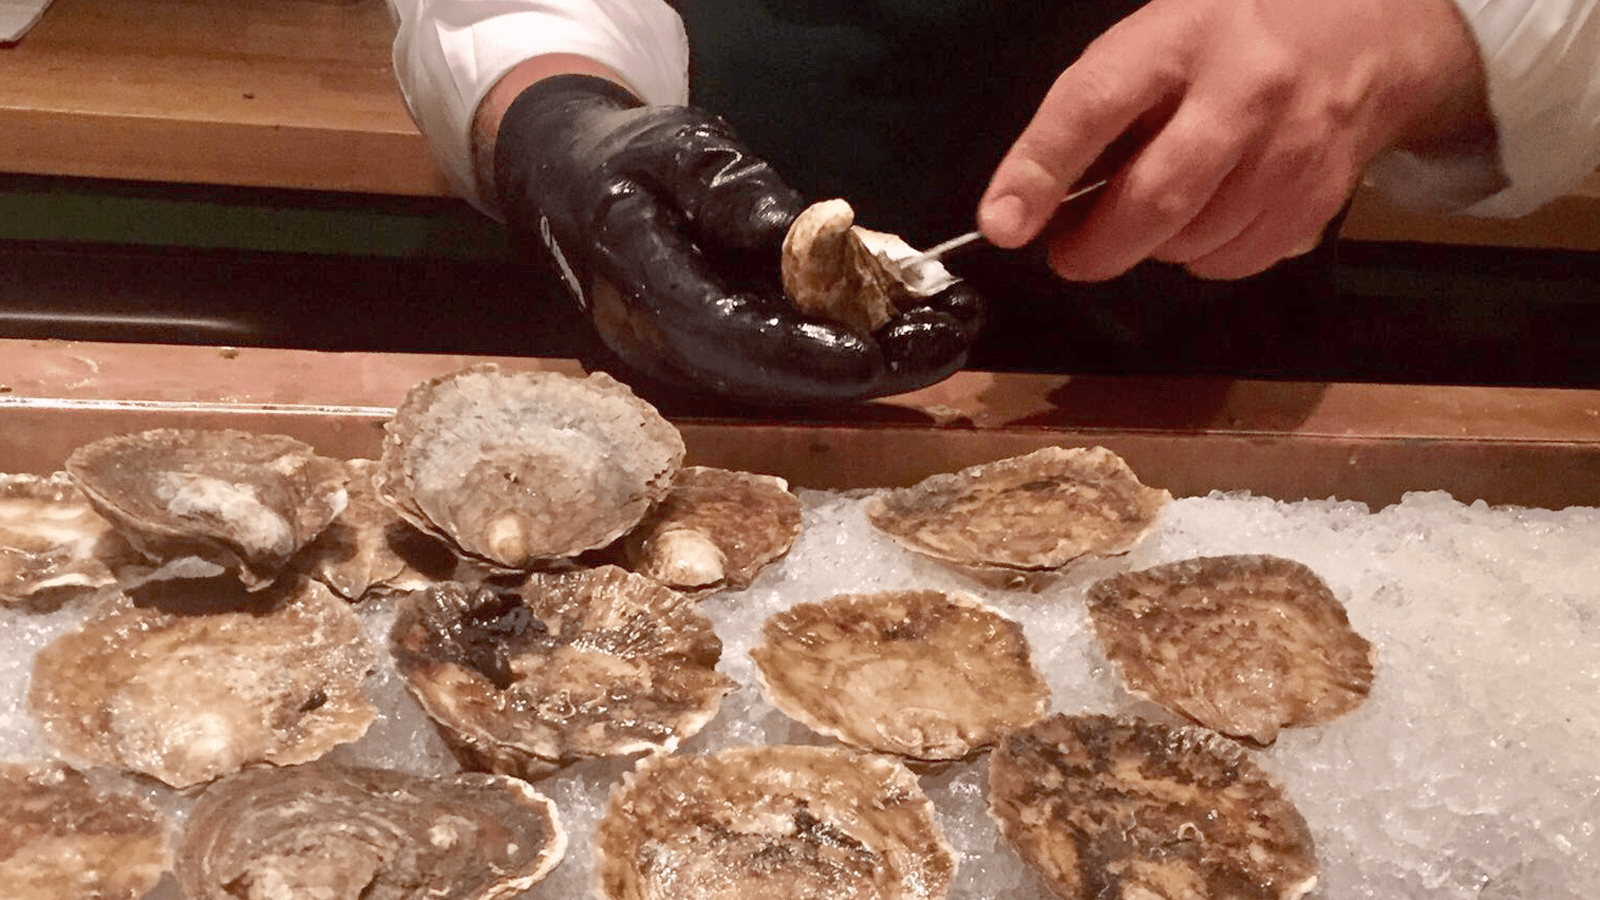 Taste the delicious oysters from Chez Henri